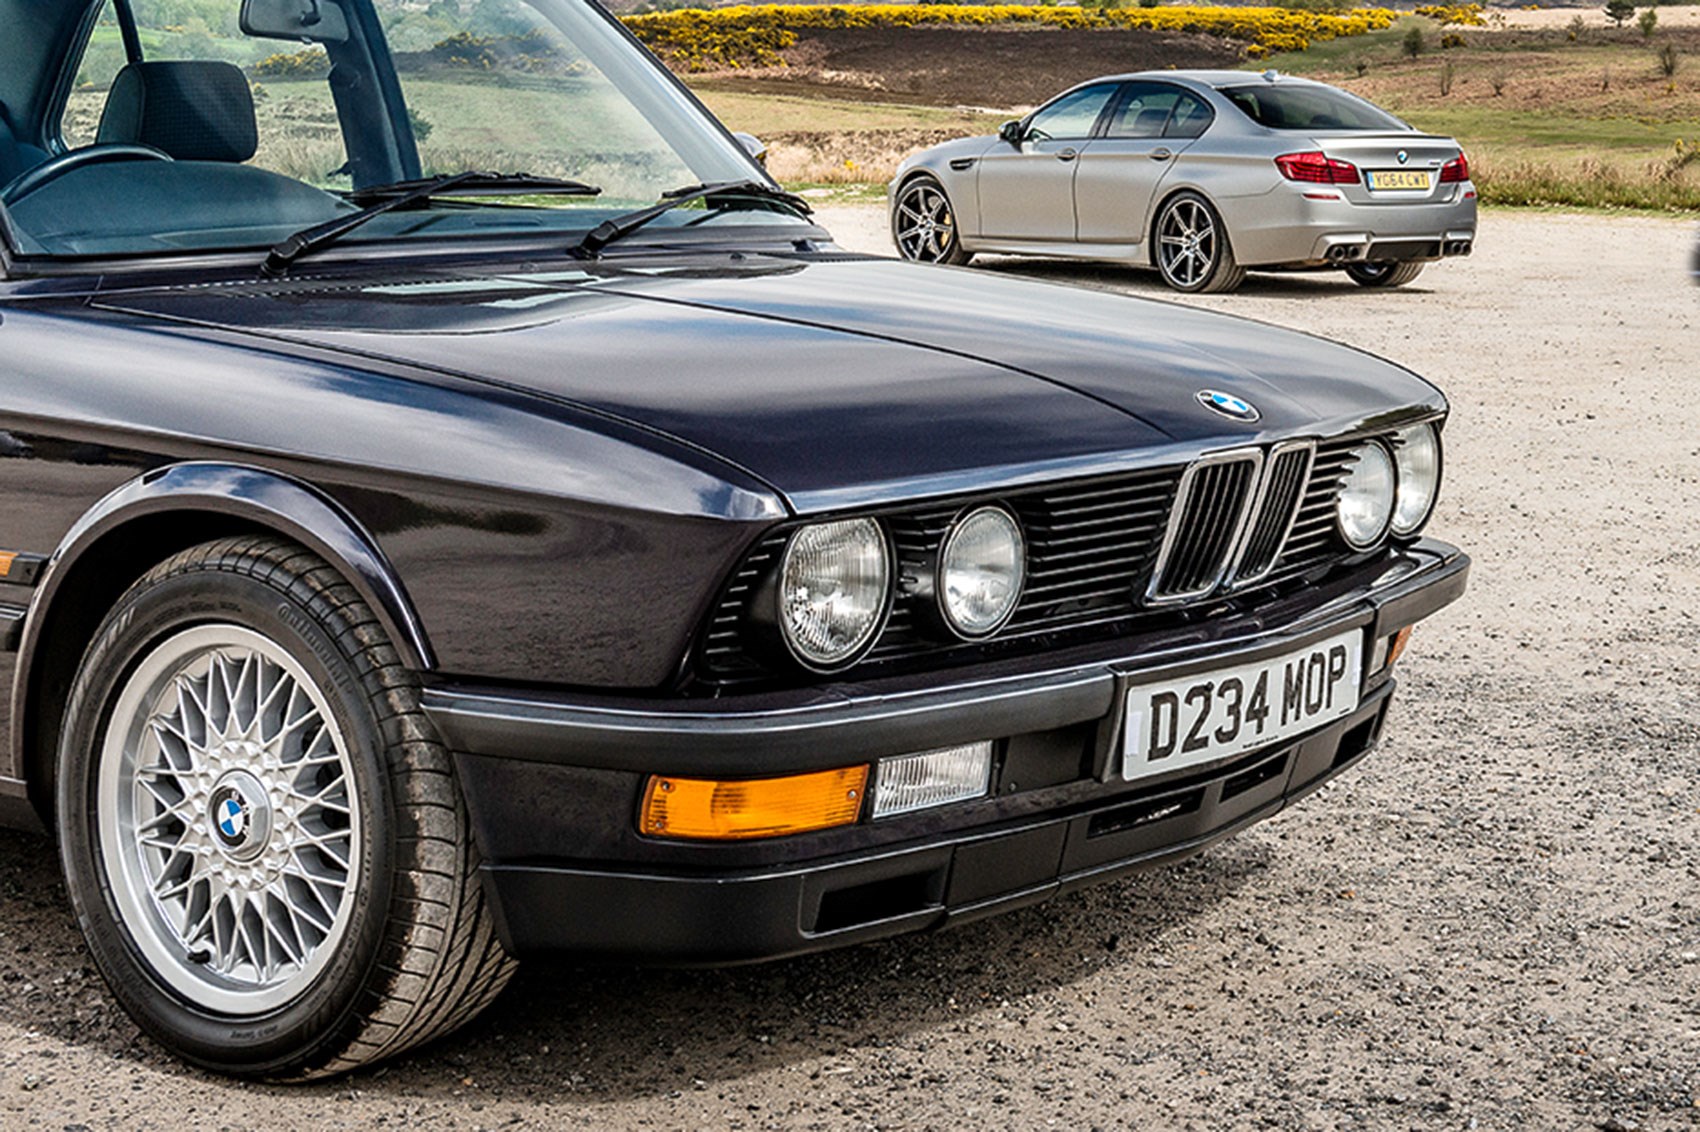 How Good Was the E34 BMW M5 Back in its Day?